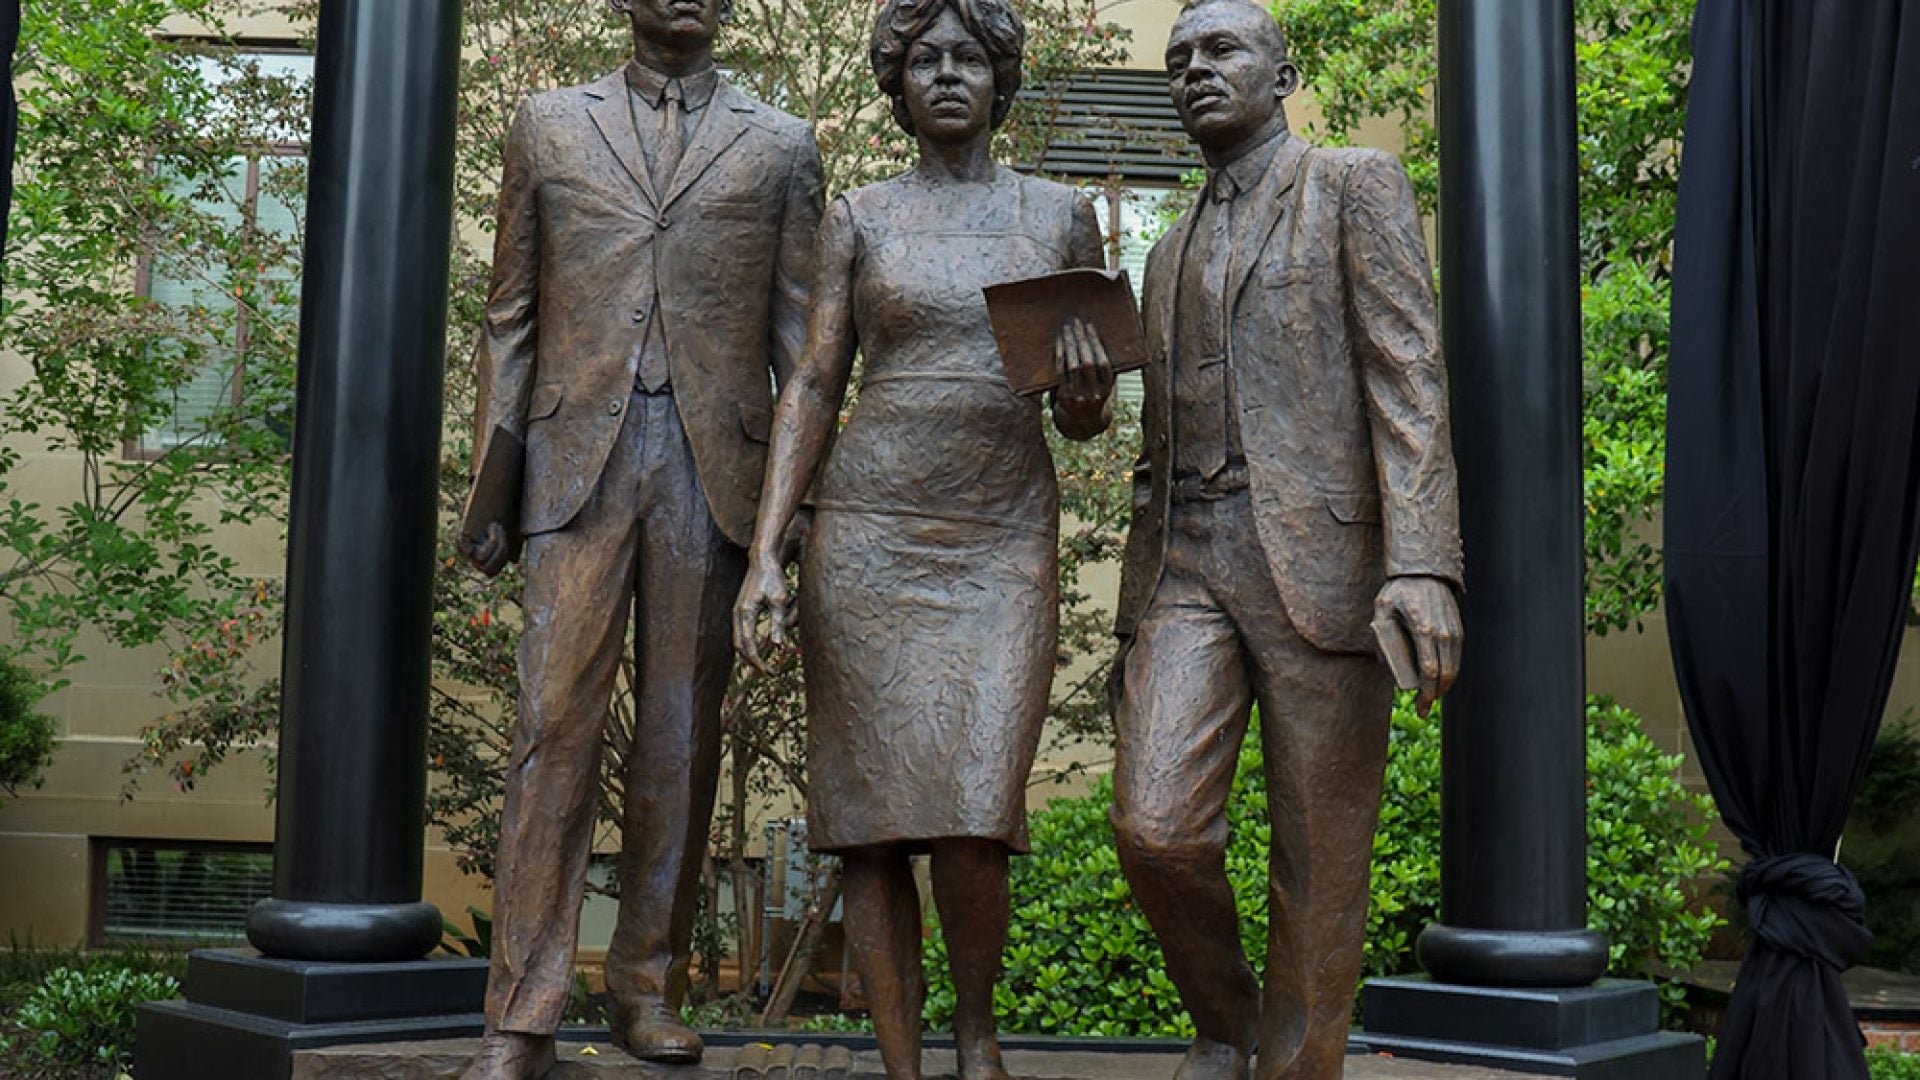 New University Of South Carolina Sculpture Honors Black Students Who Helped Integrate The School